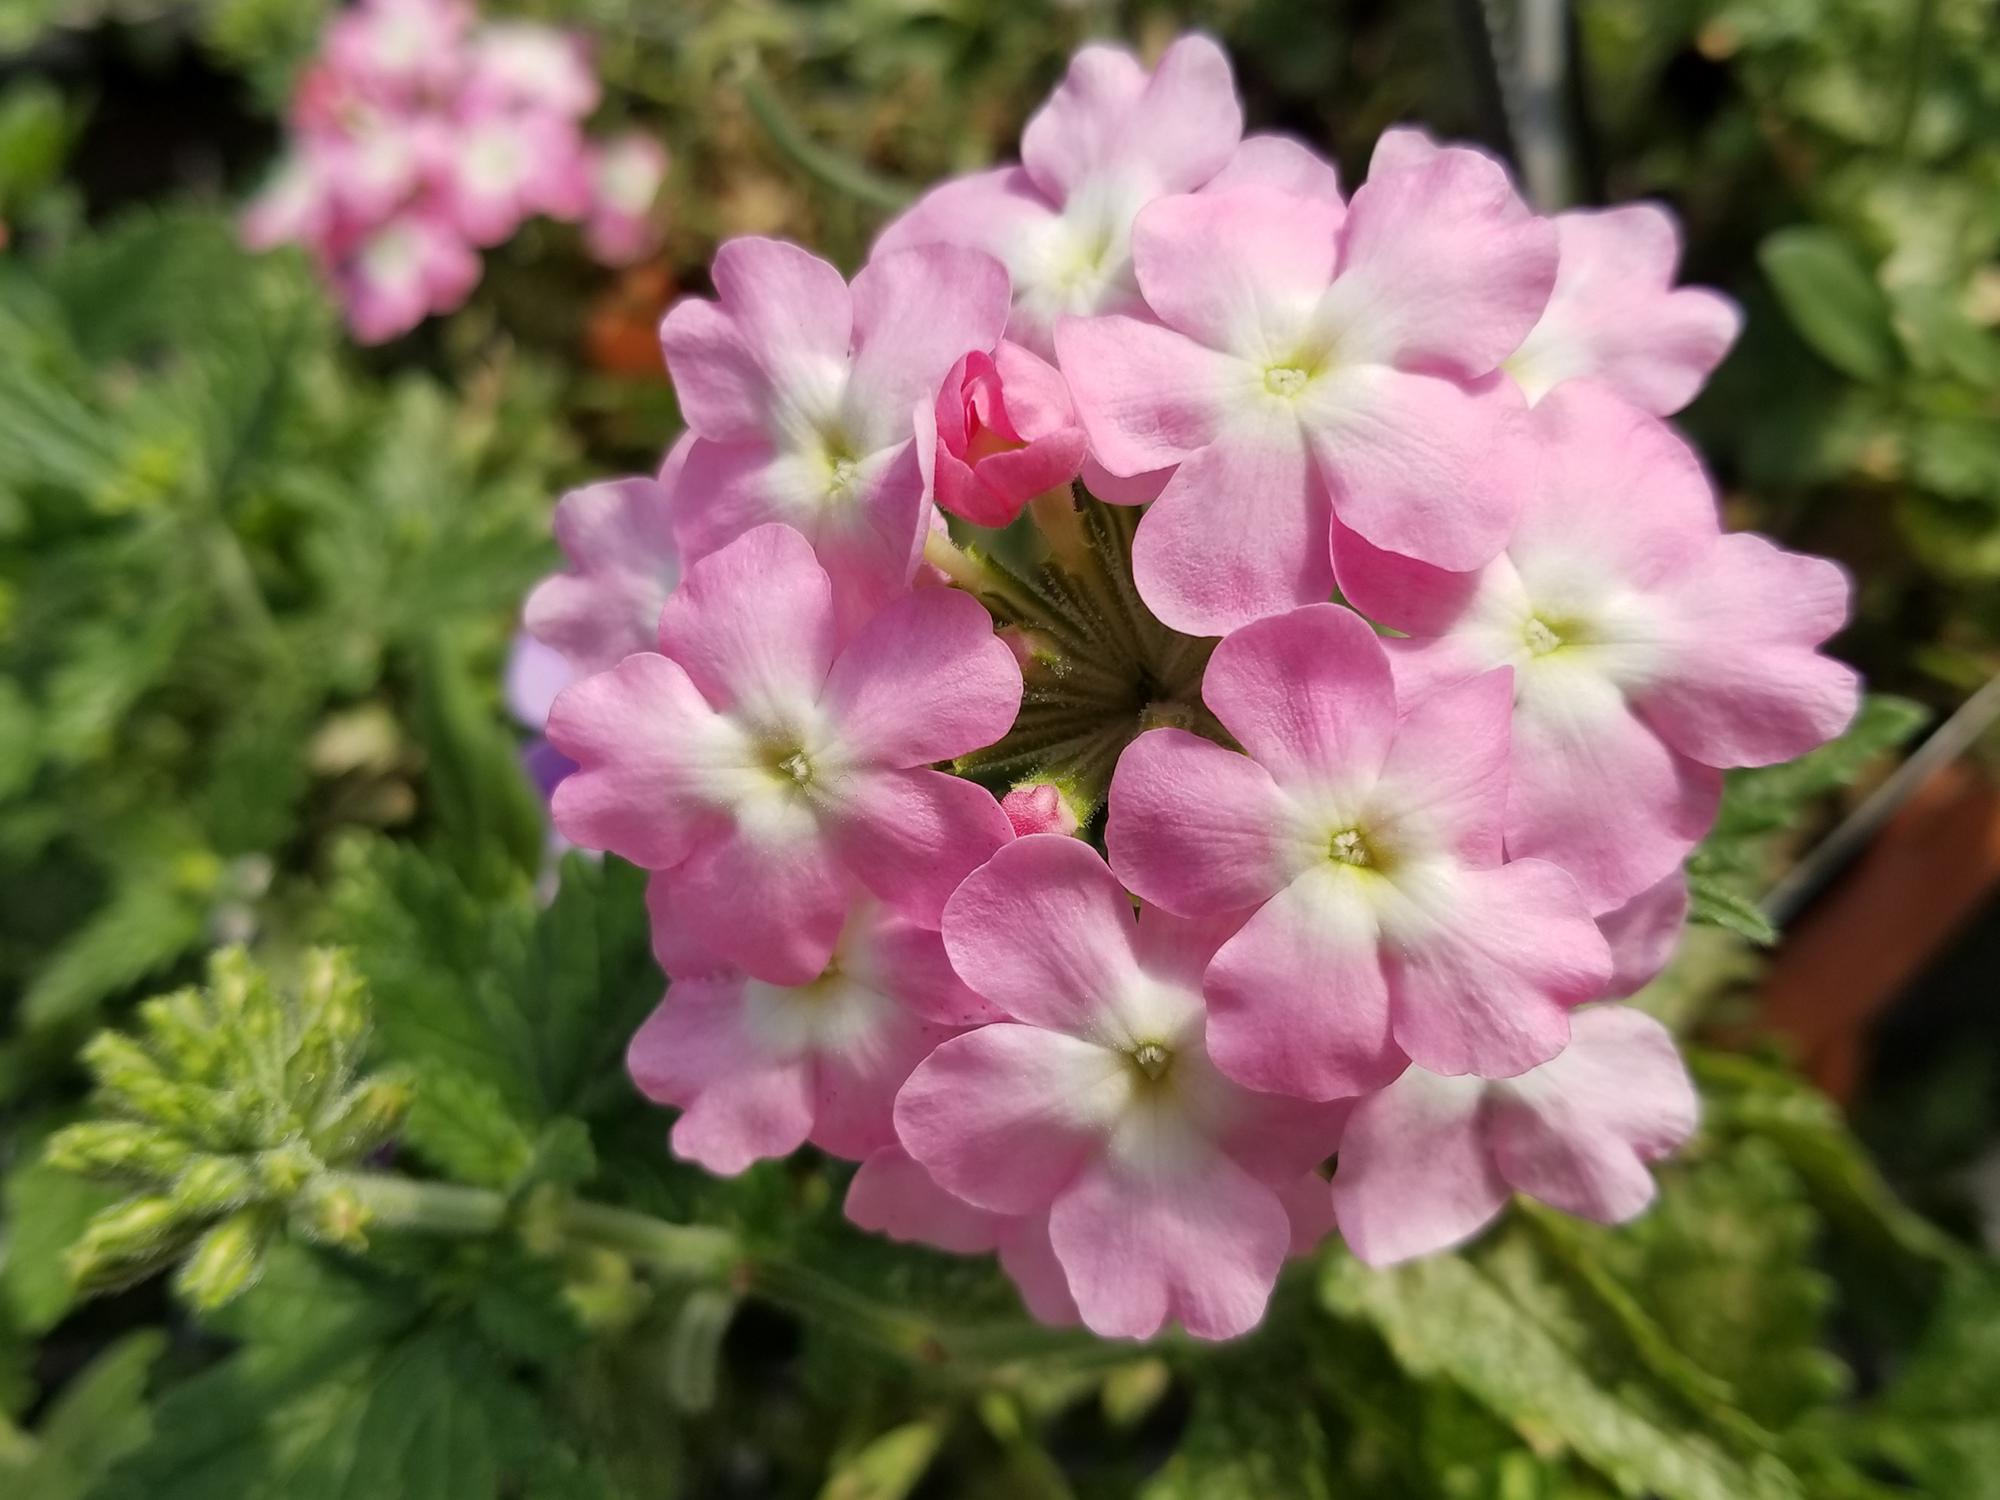 A cluster of small pink verbena flowers with white centers is seen above a bed of green.